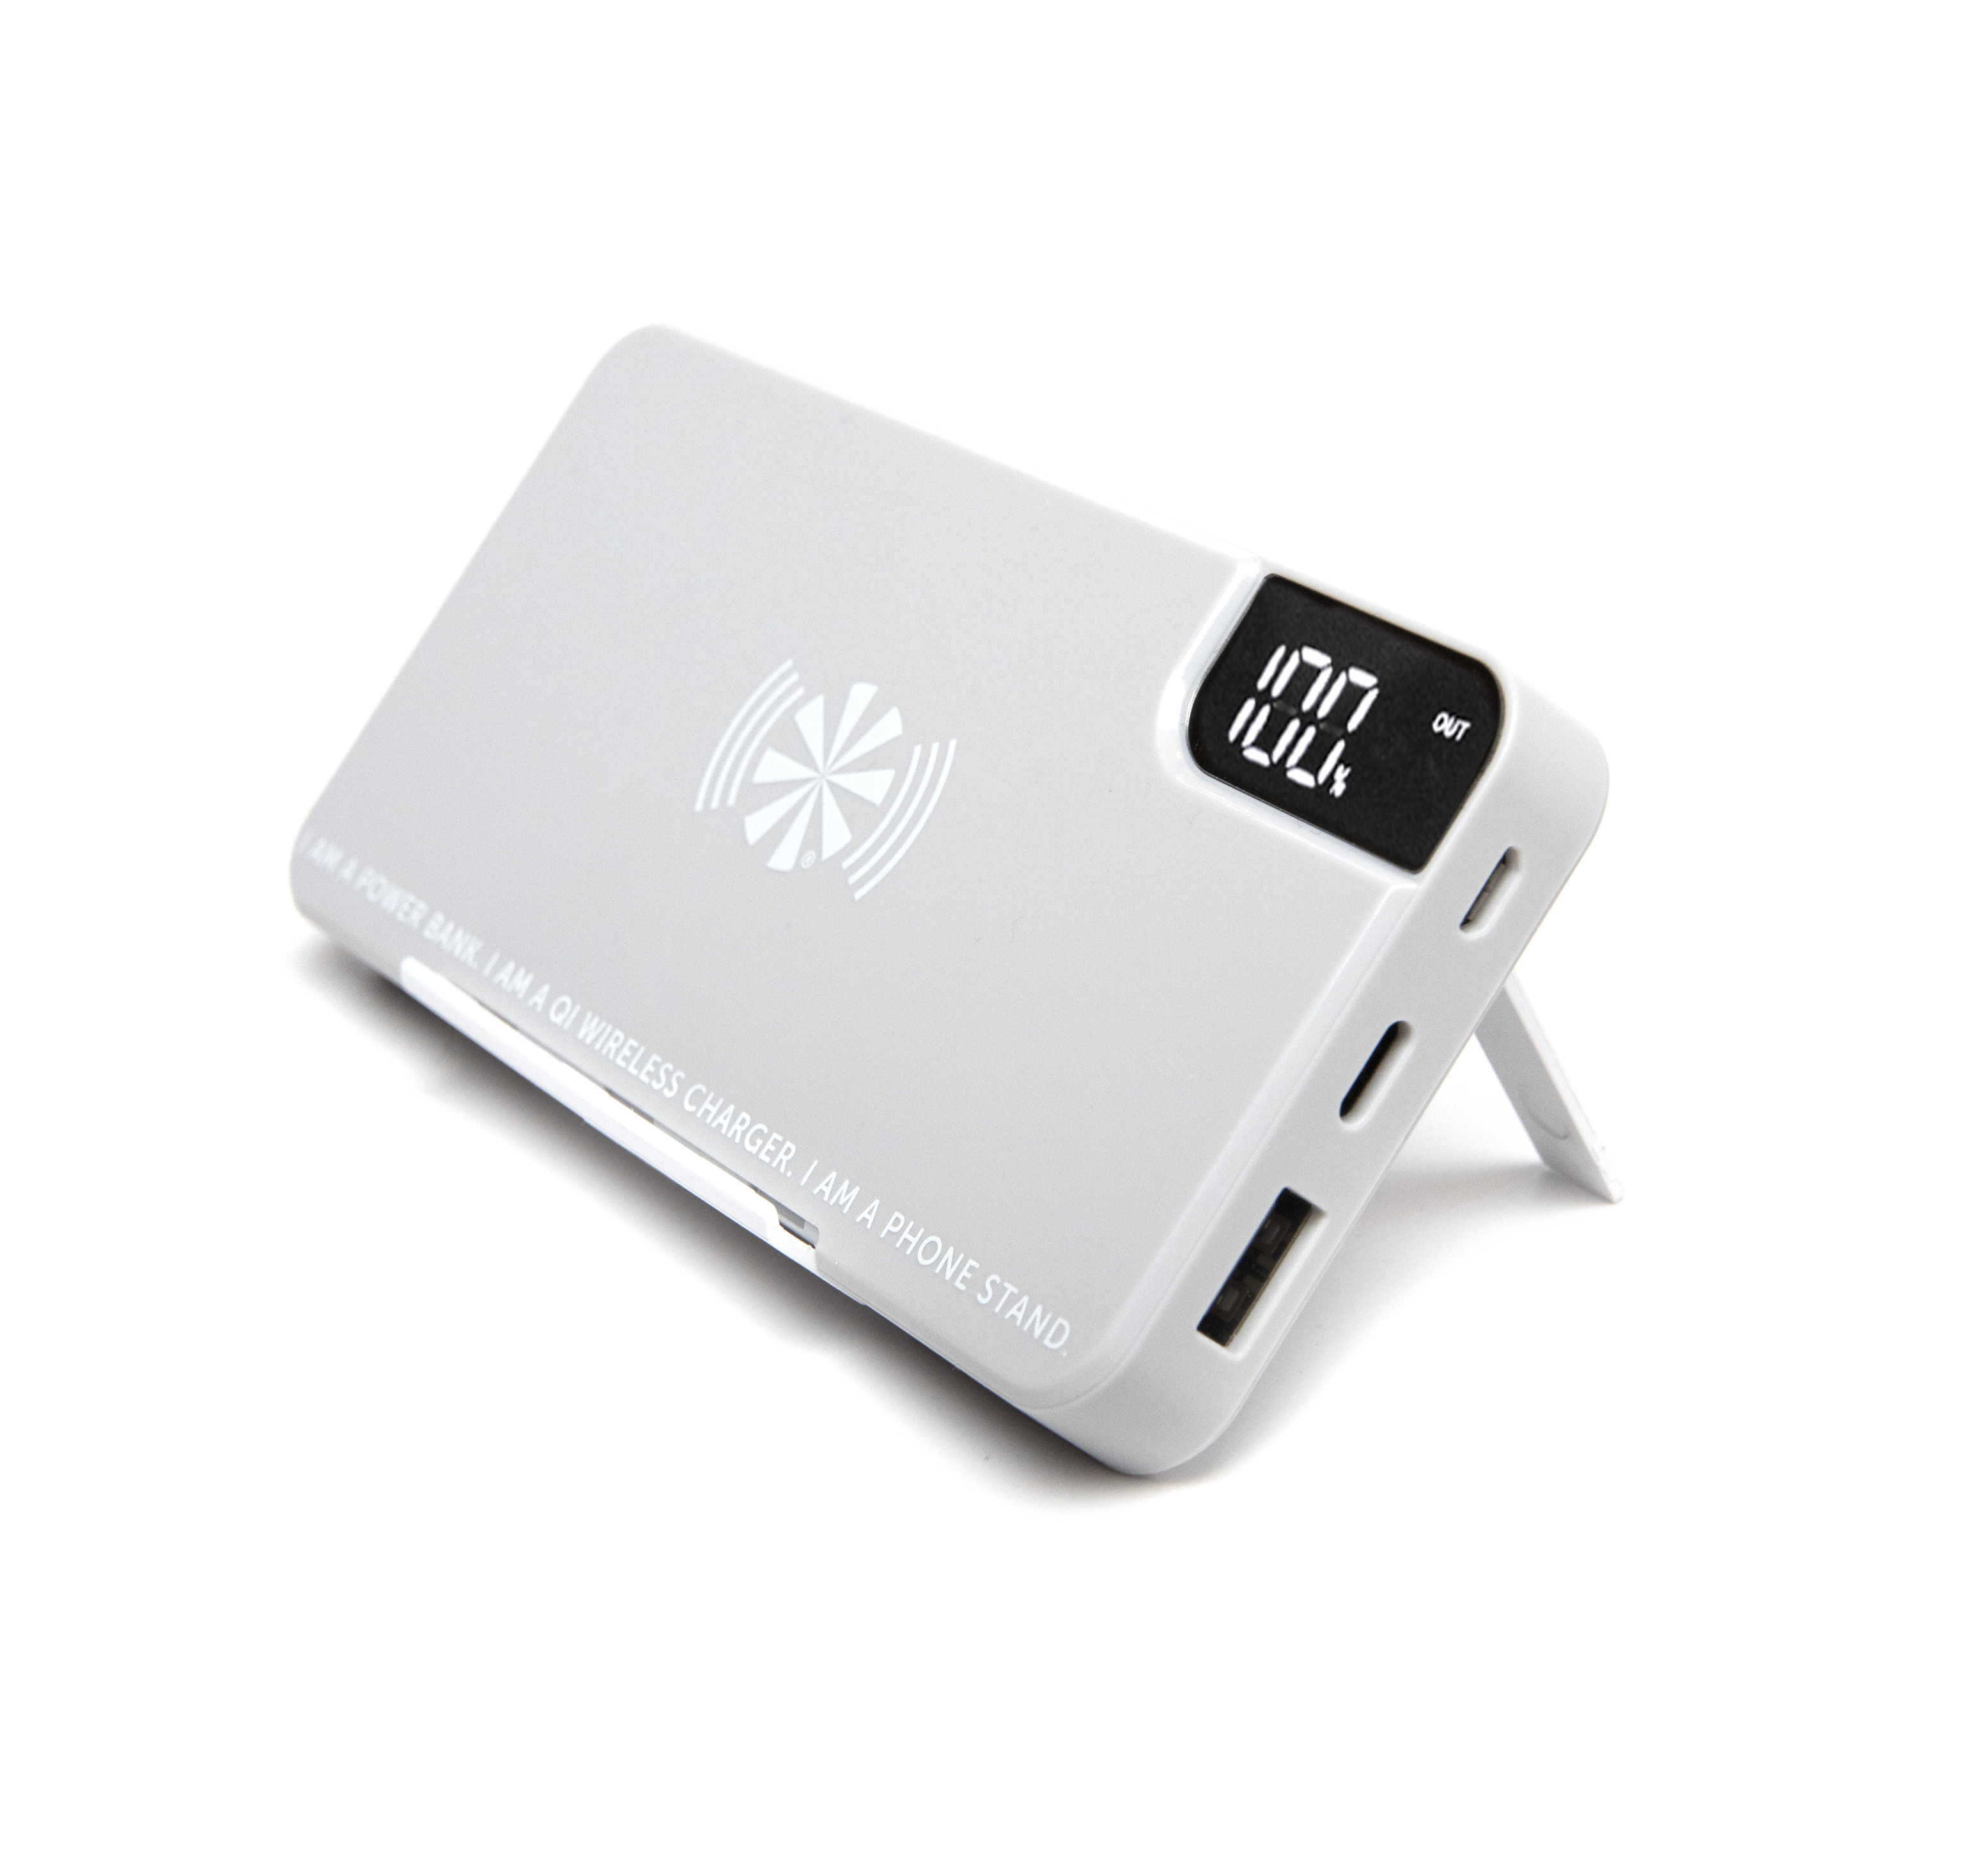 Take Charge Power Bank 
															/ OCG Products							